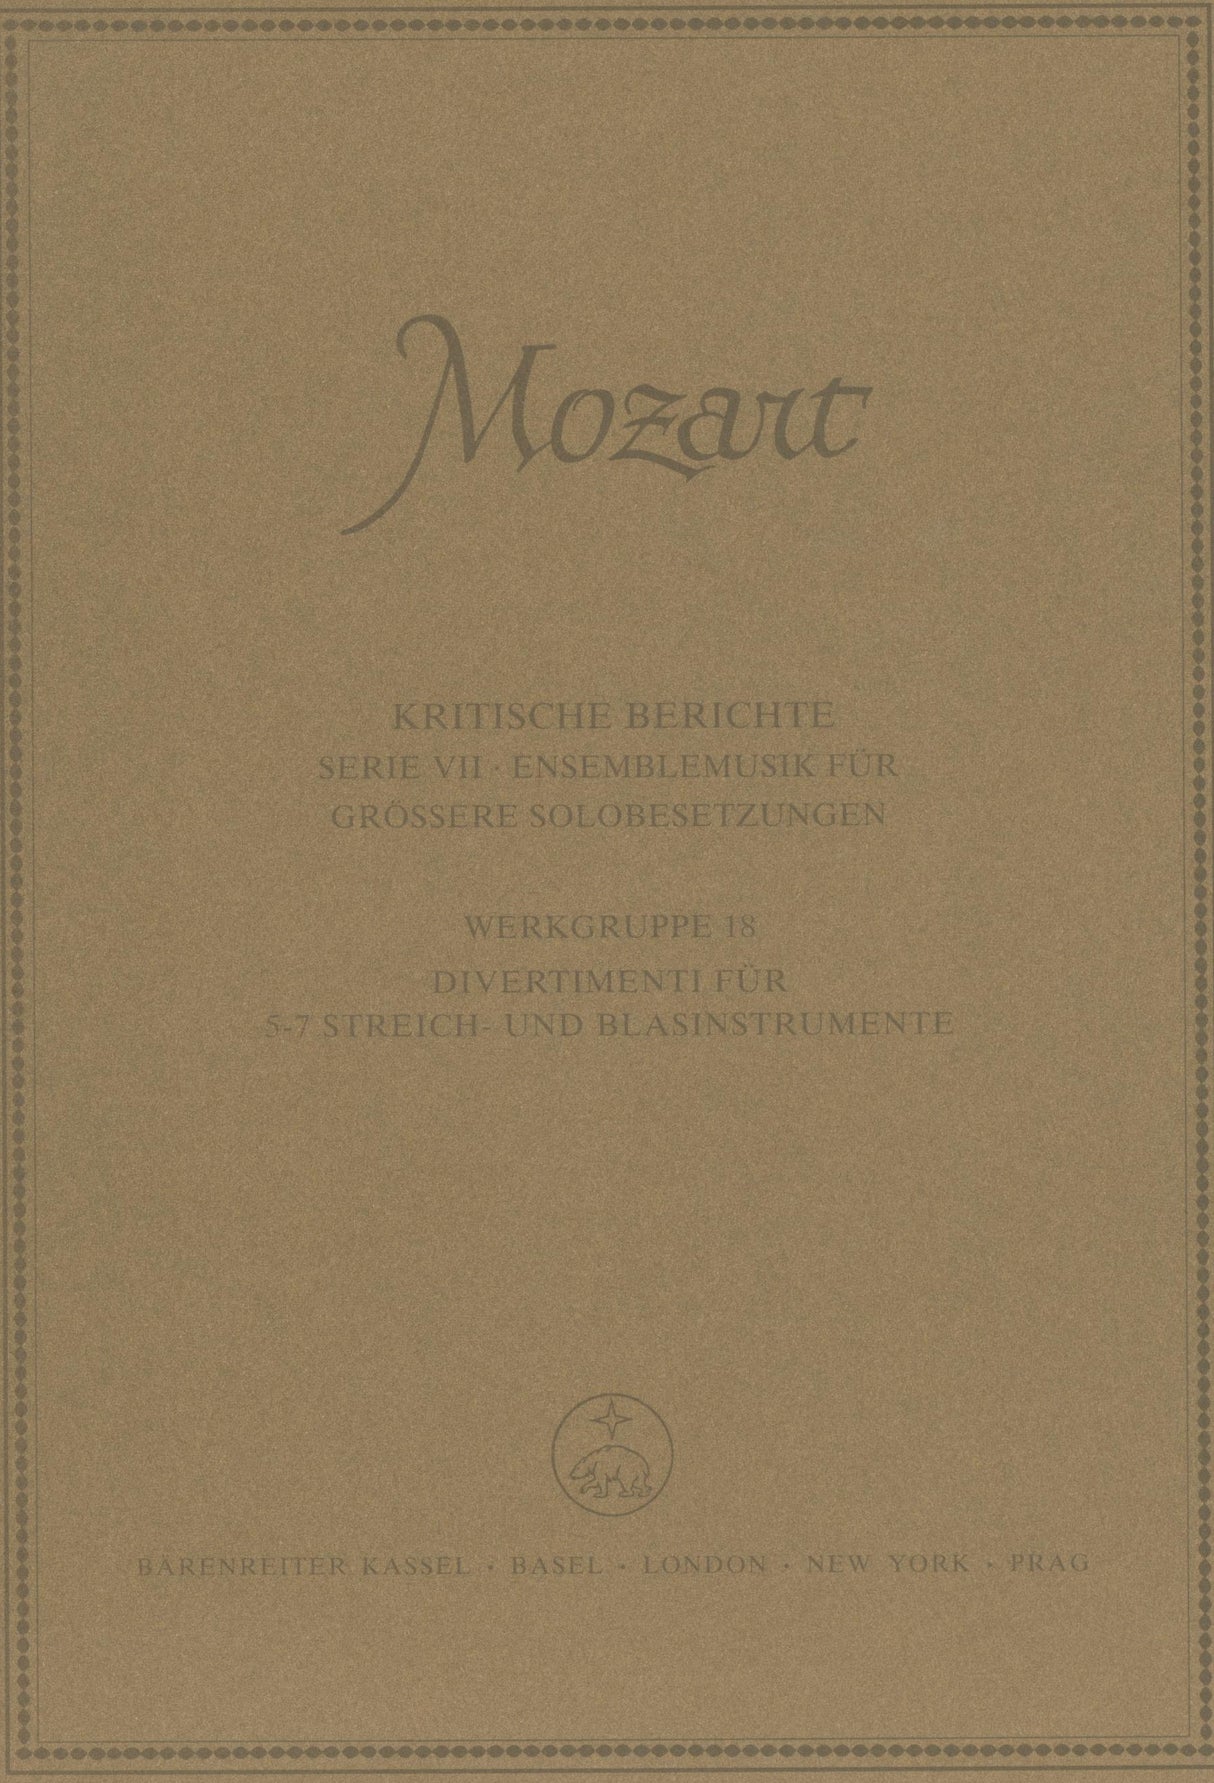 Mozart: Divertimenti for 5-7 String and Wind Instruments